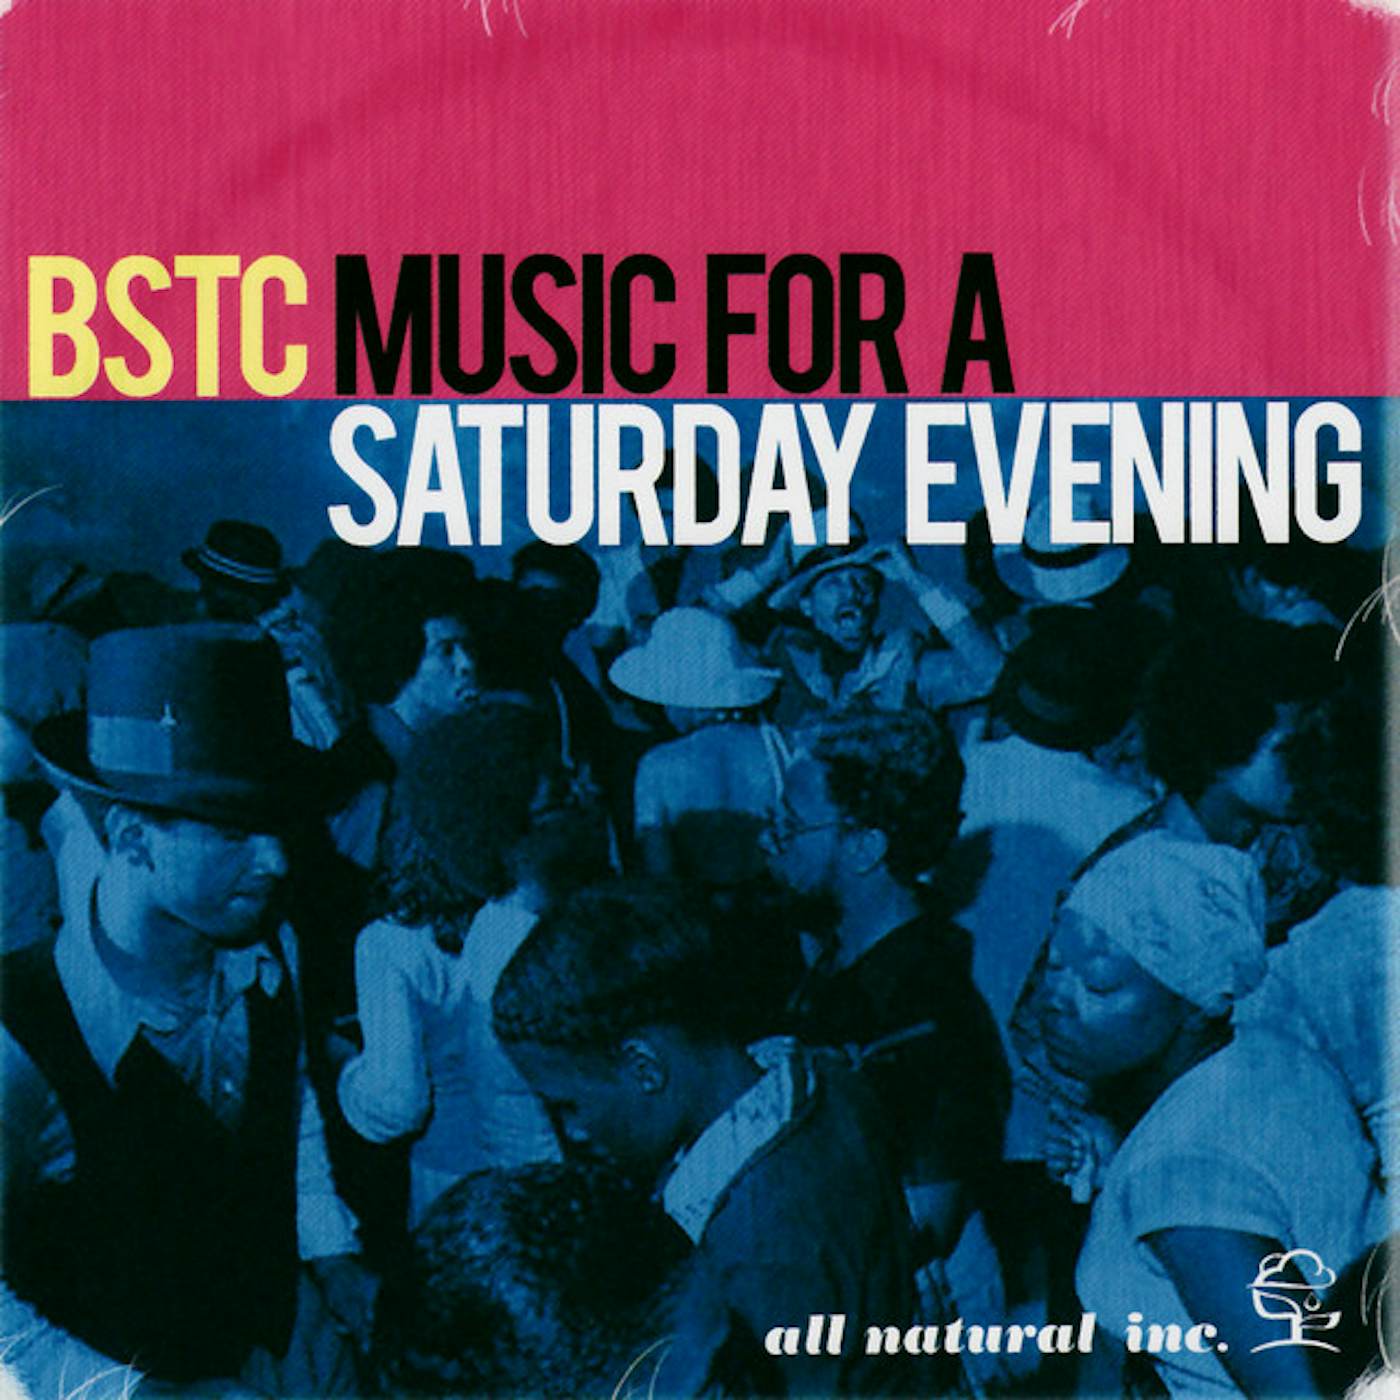 BSTC Music for a Saturday Evening Vinyl Record